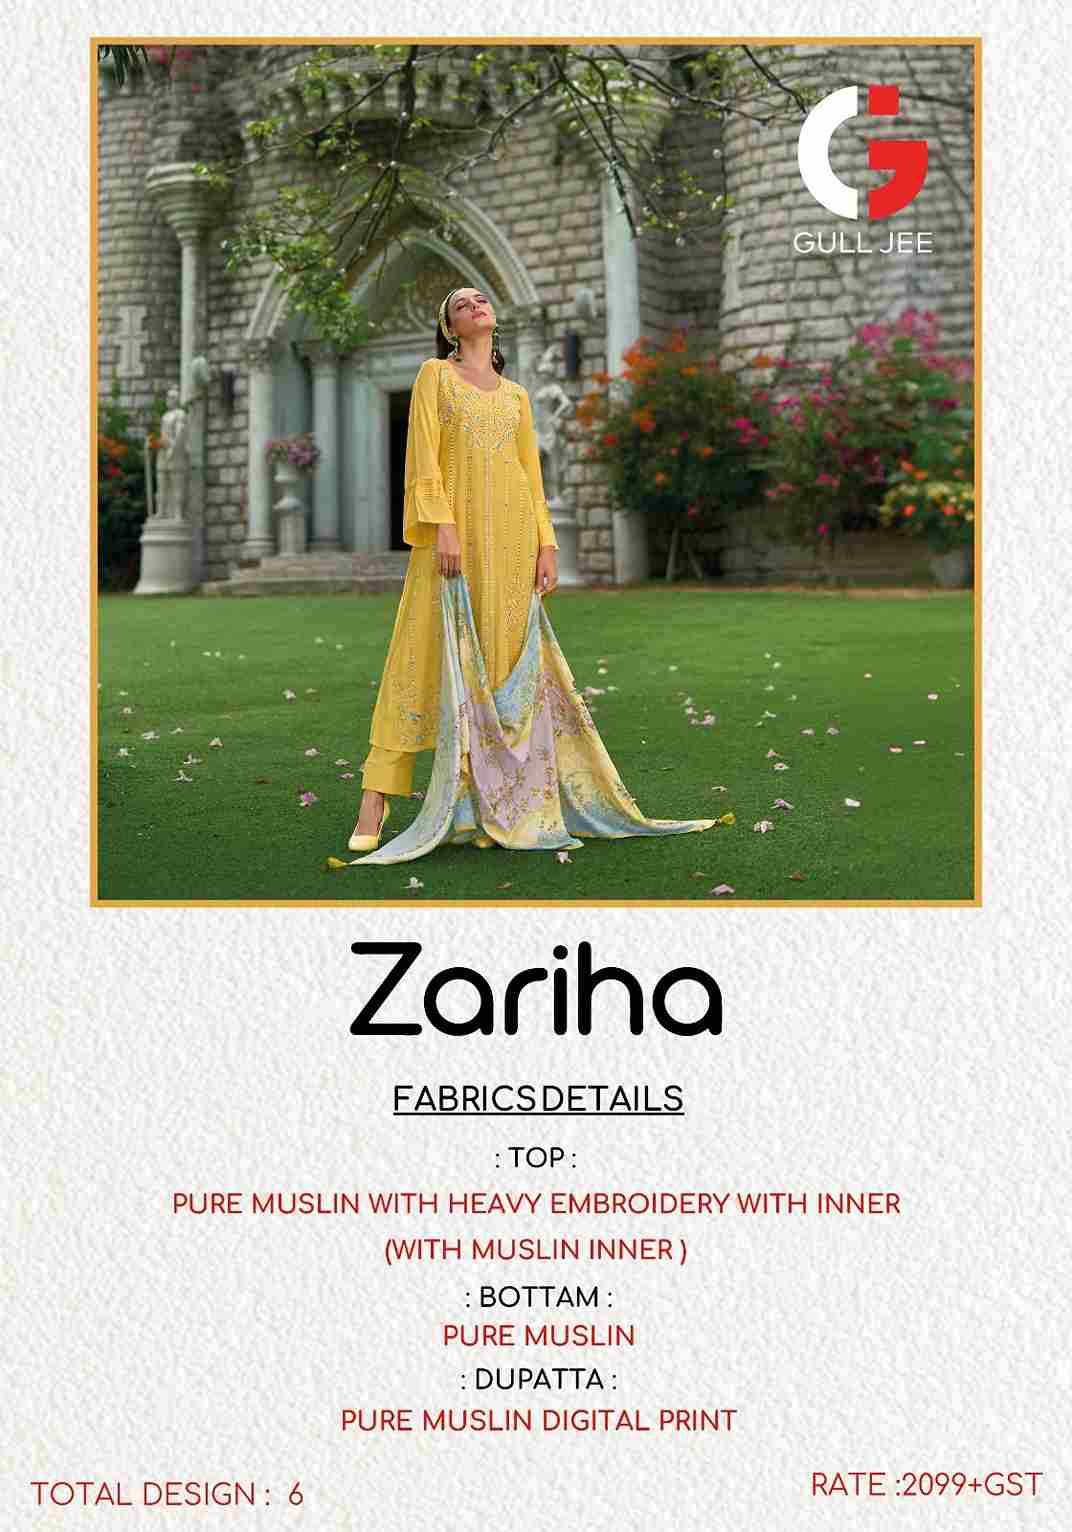 Zariha By Gull Jee 10001 To 10006 Series Beautiful Festive Suits Colorful Stylish Fancy Casual Wear & Ethnic Wear Pure Muslin Embroidered Dresses At Wholesale Price